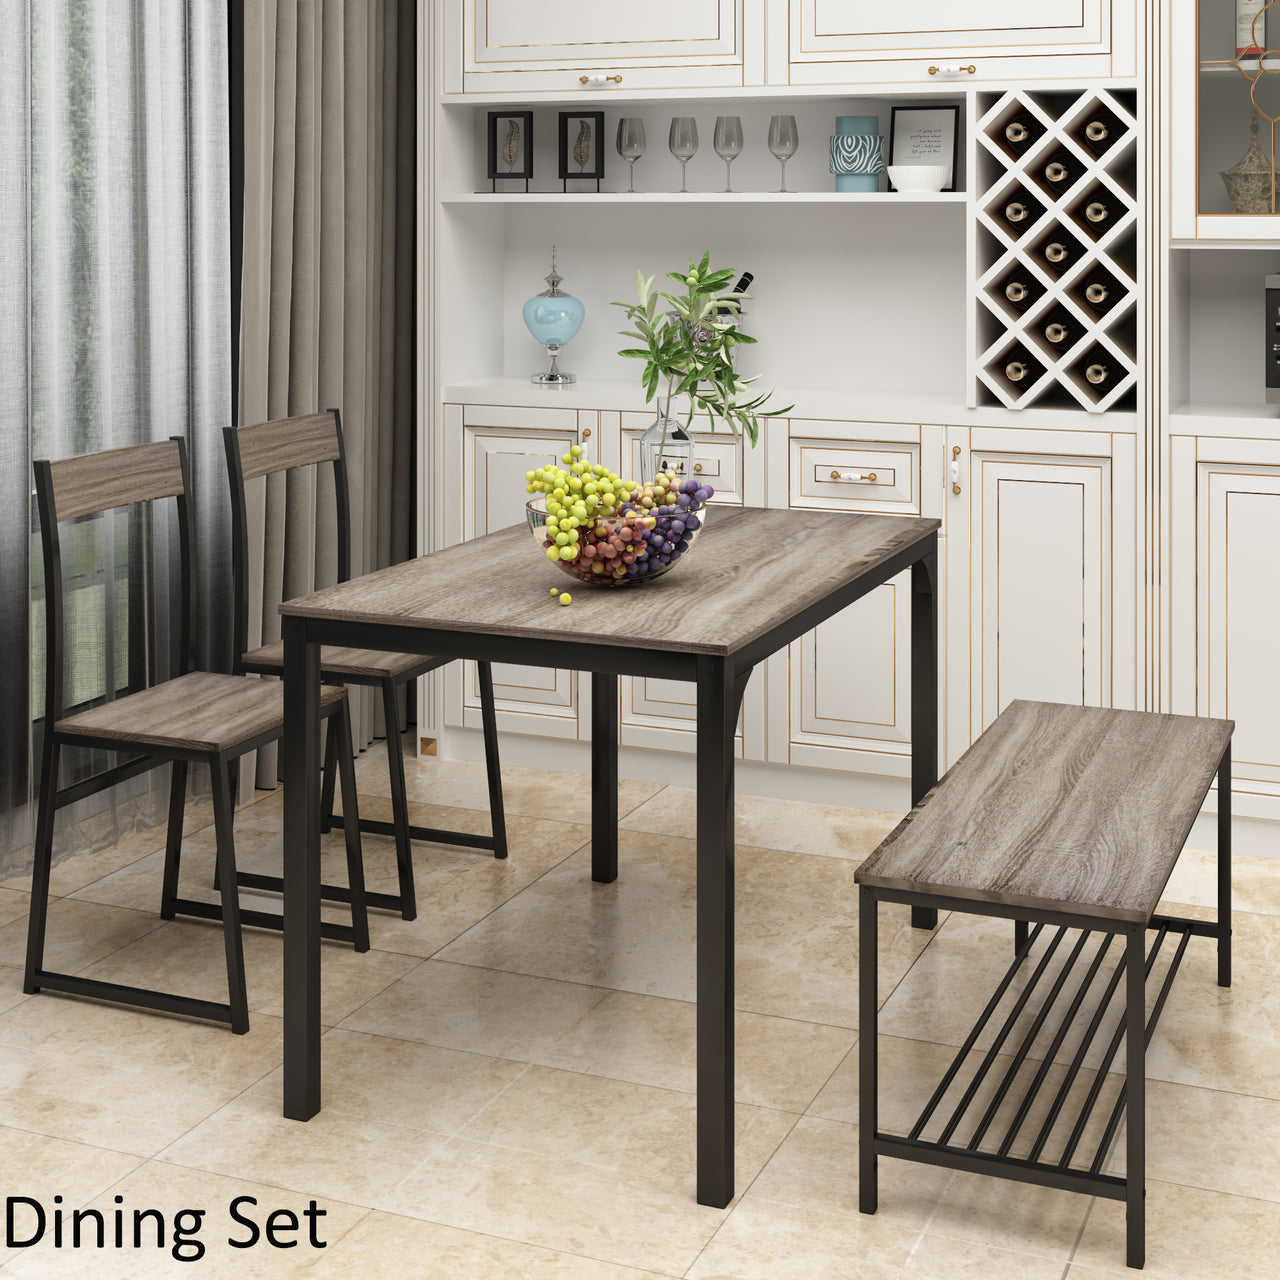 4 Piece Dining Set for 4 Kitchen Table Set Computer Desk with 2 Chairs and Bench for Home Dining Room, Gray